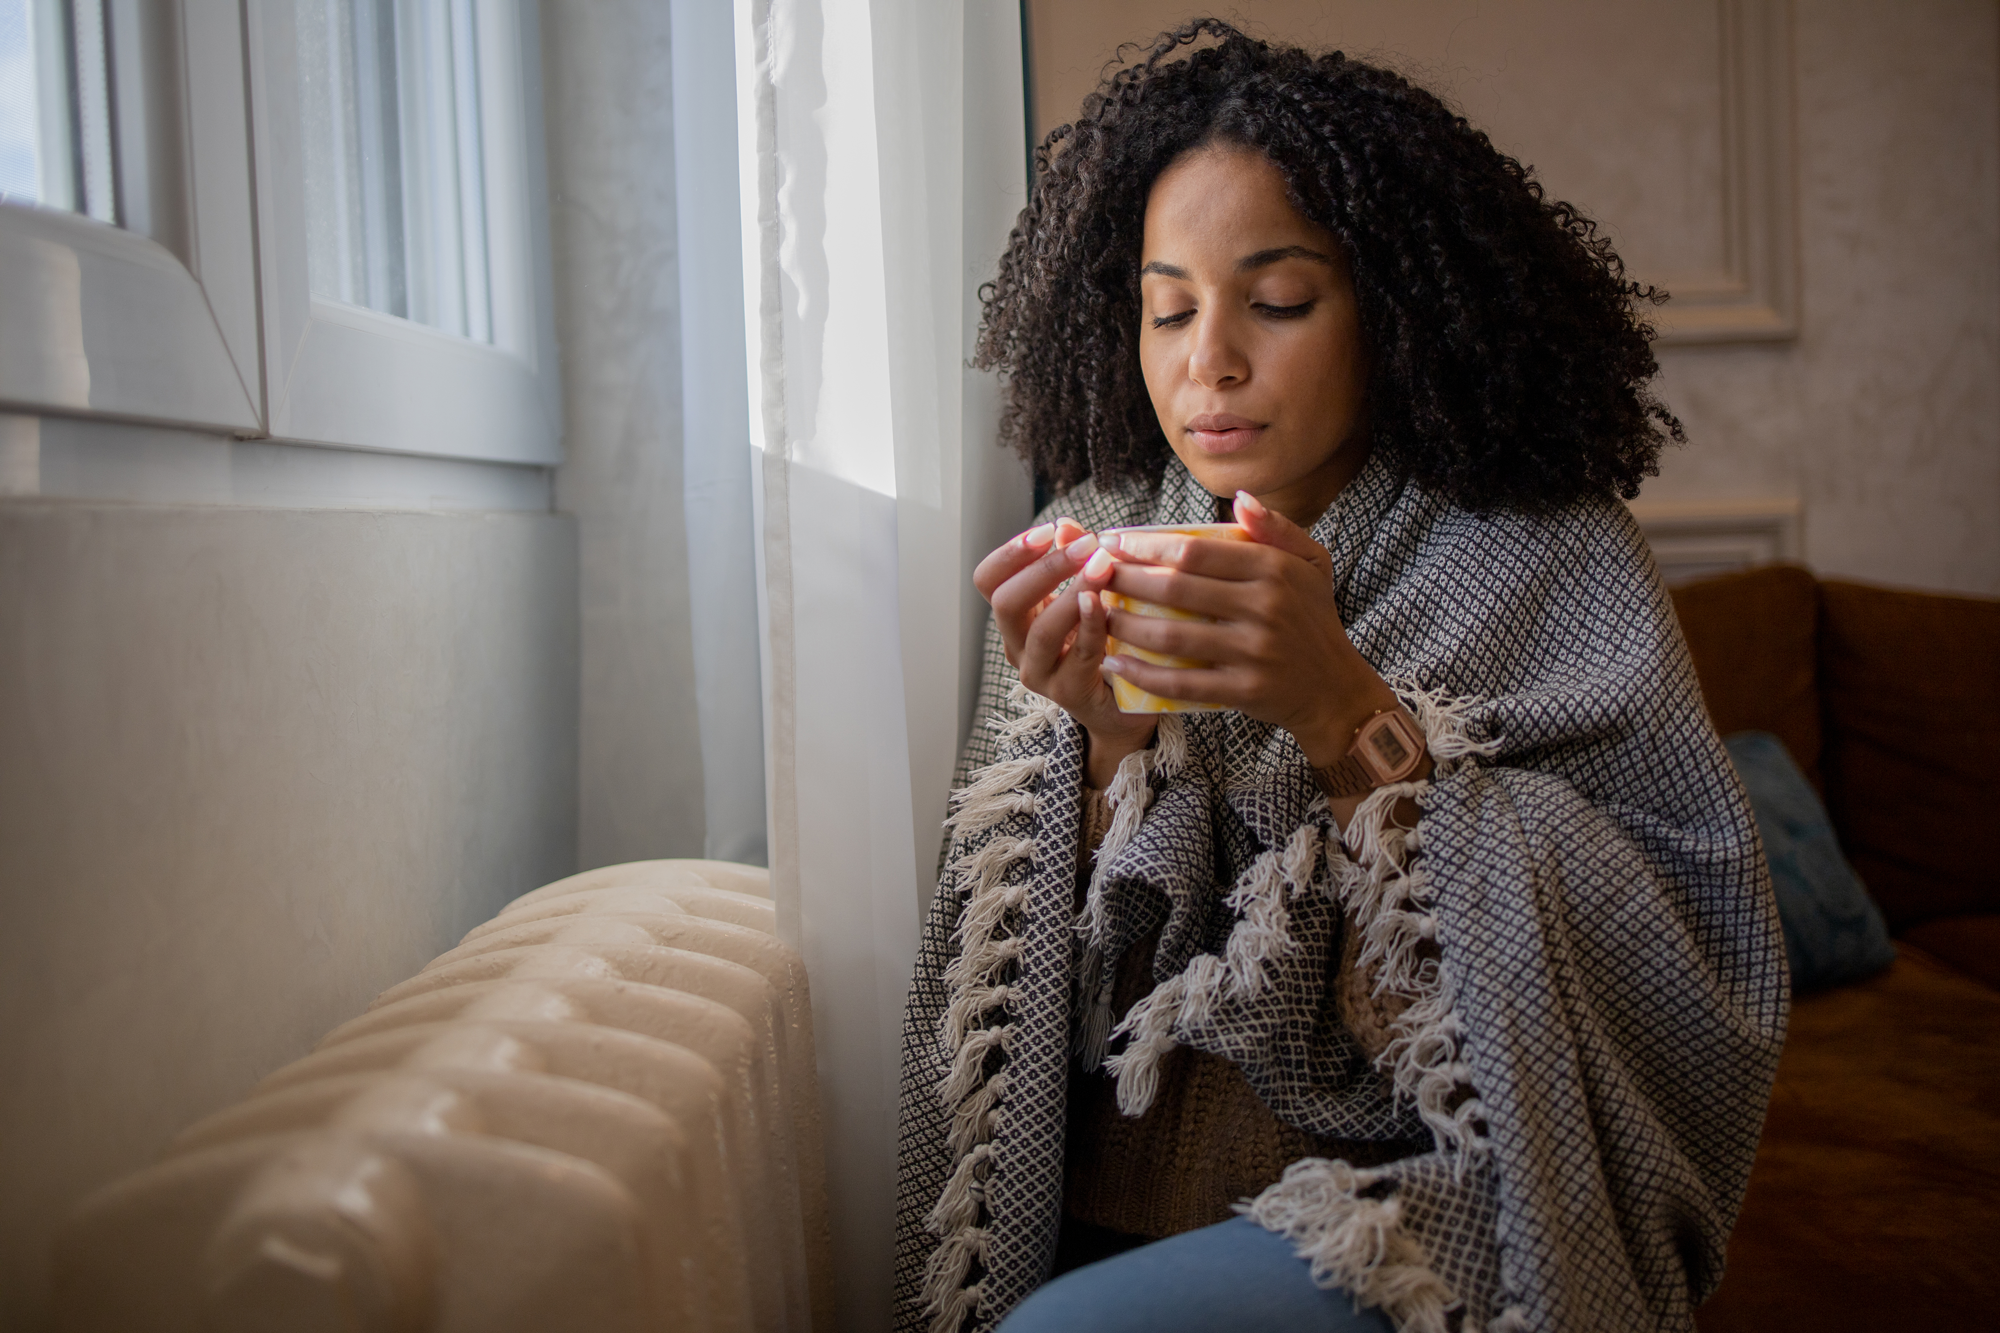 Woman wrapped in blanket and drinking from a warm cup